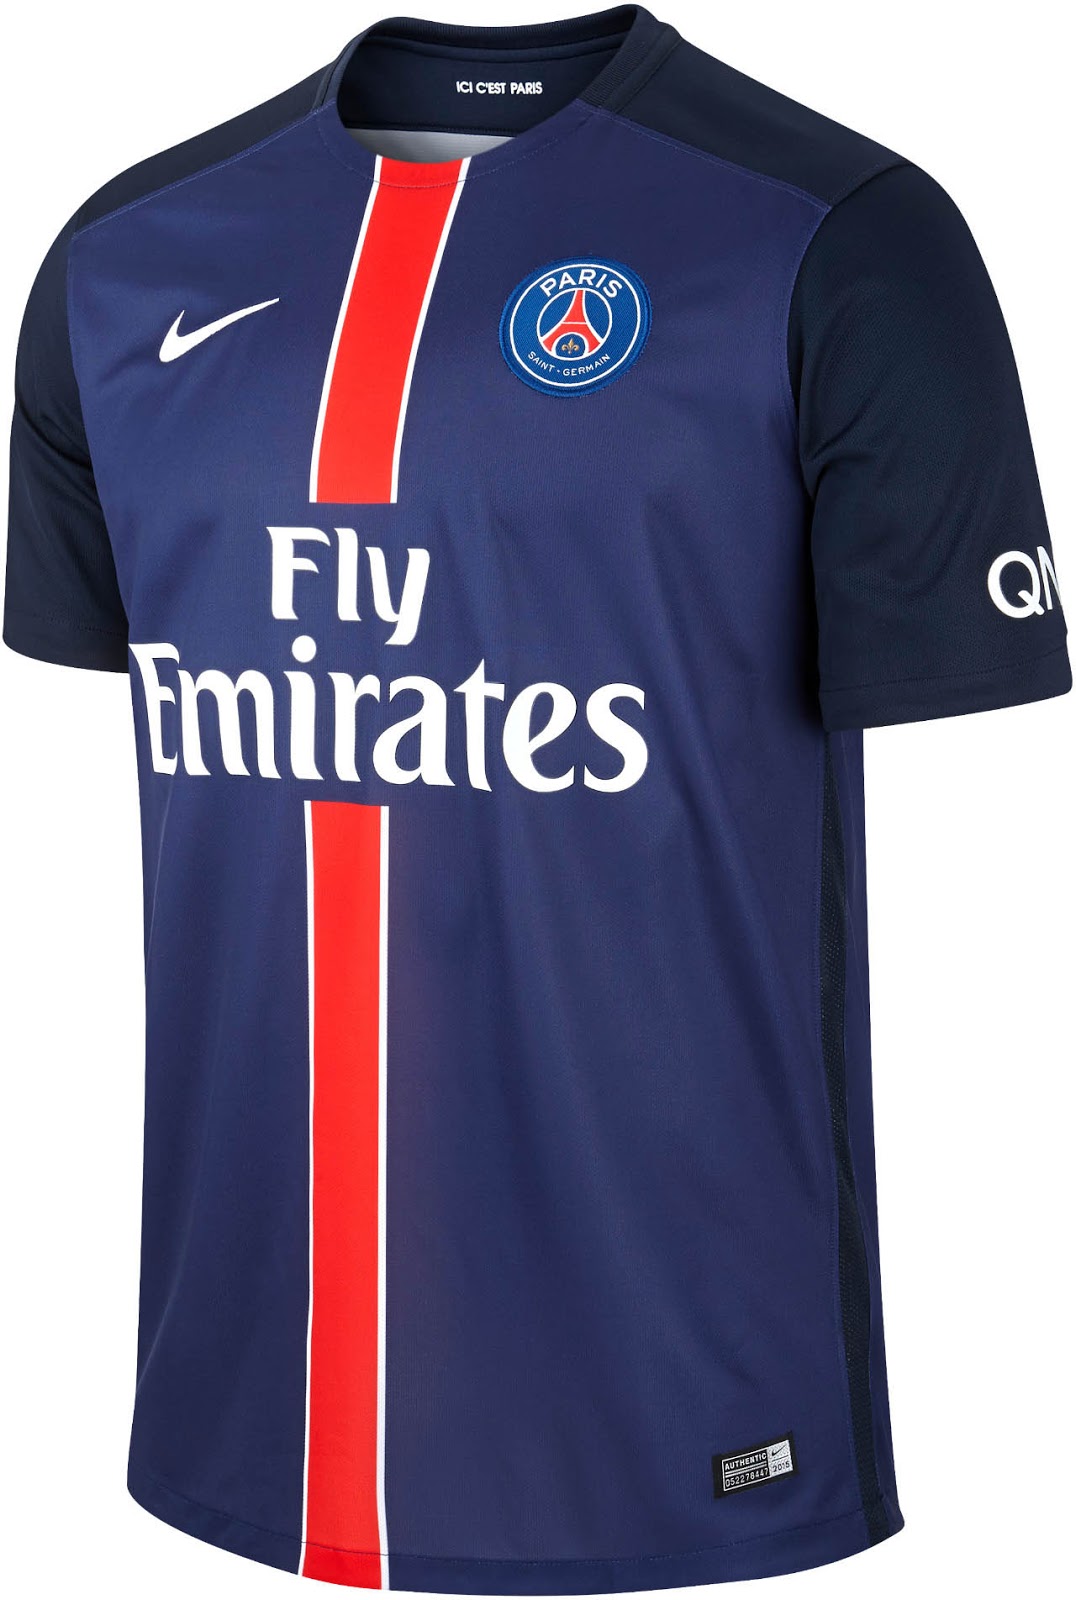 Buy Psg Football Team Jersey And Shorts Online @ ₹999 from ShopClues